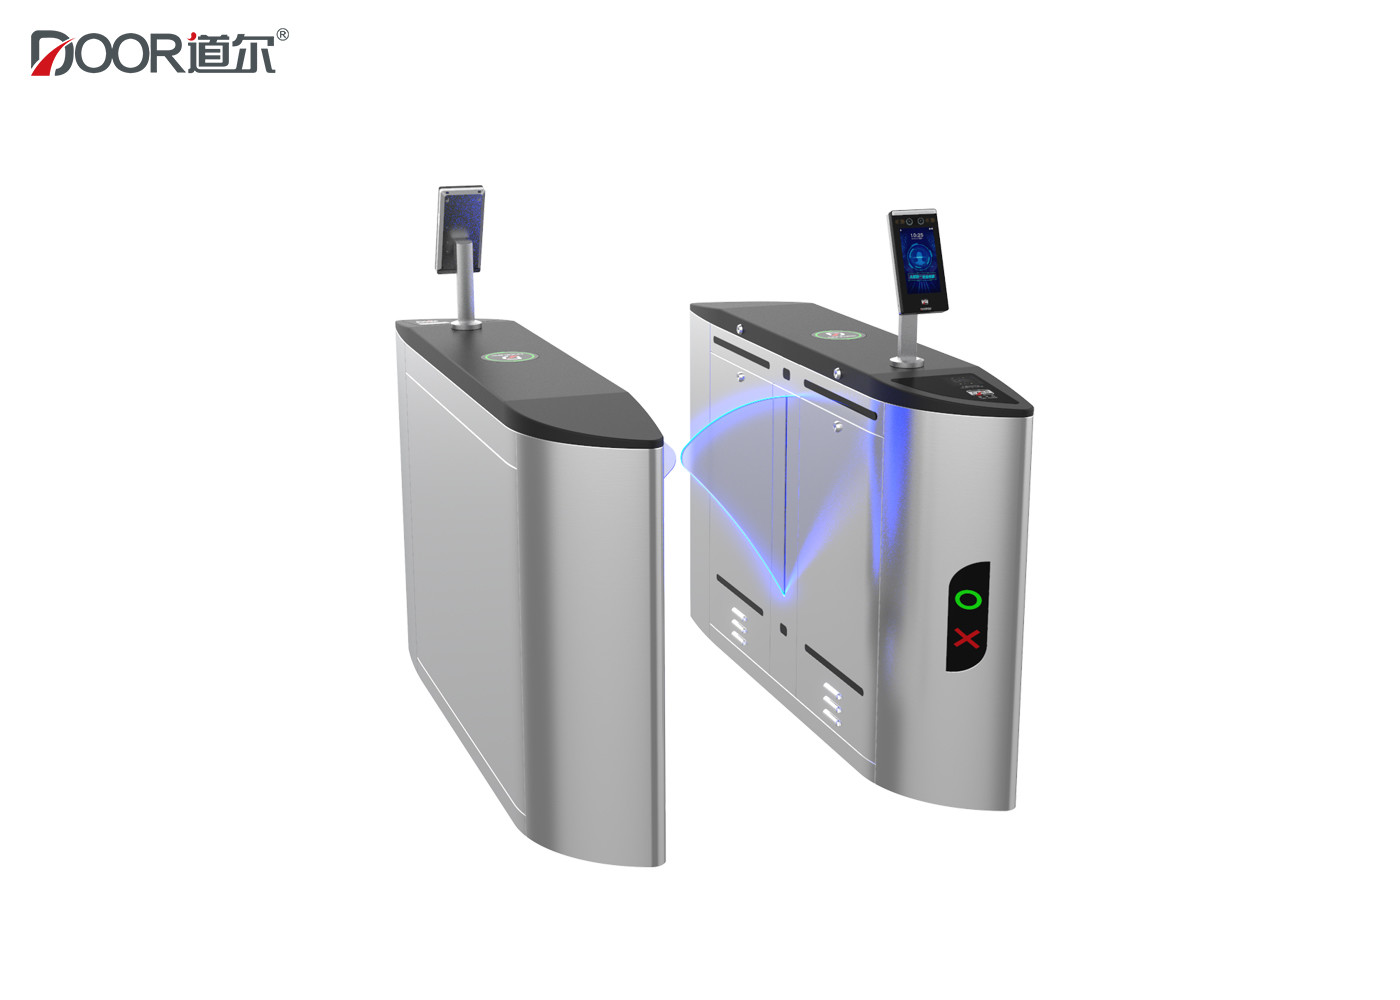 DC Brushless Motor Facial Recognition Turnstile Entry Systems Long Lifespan